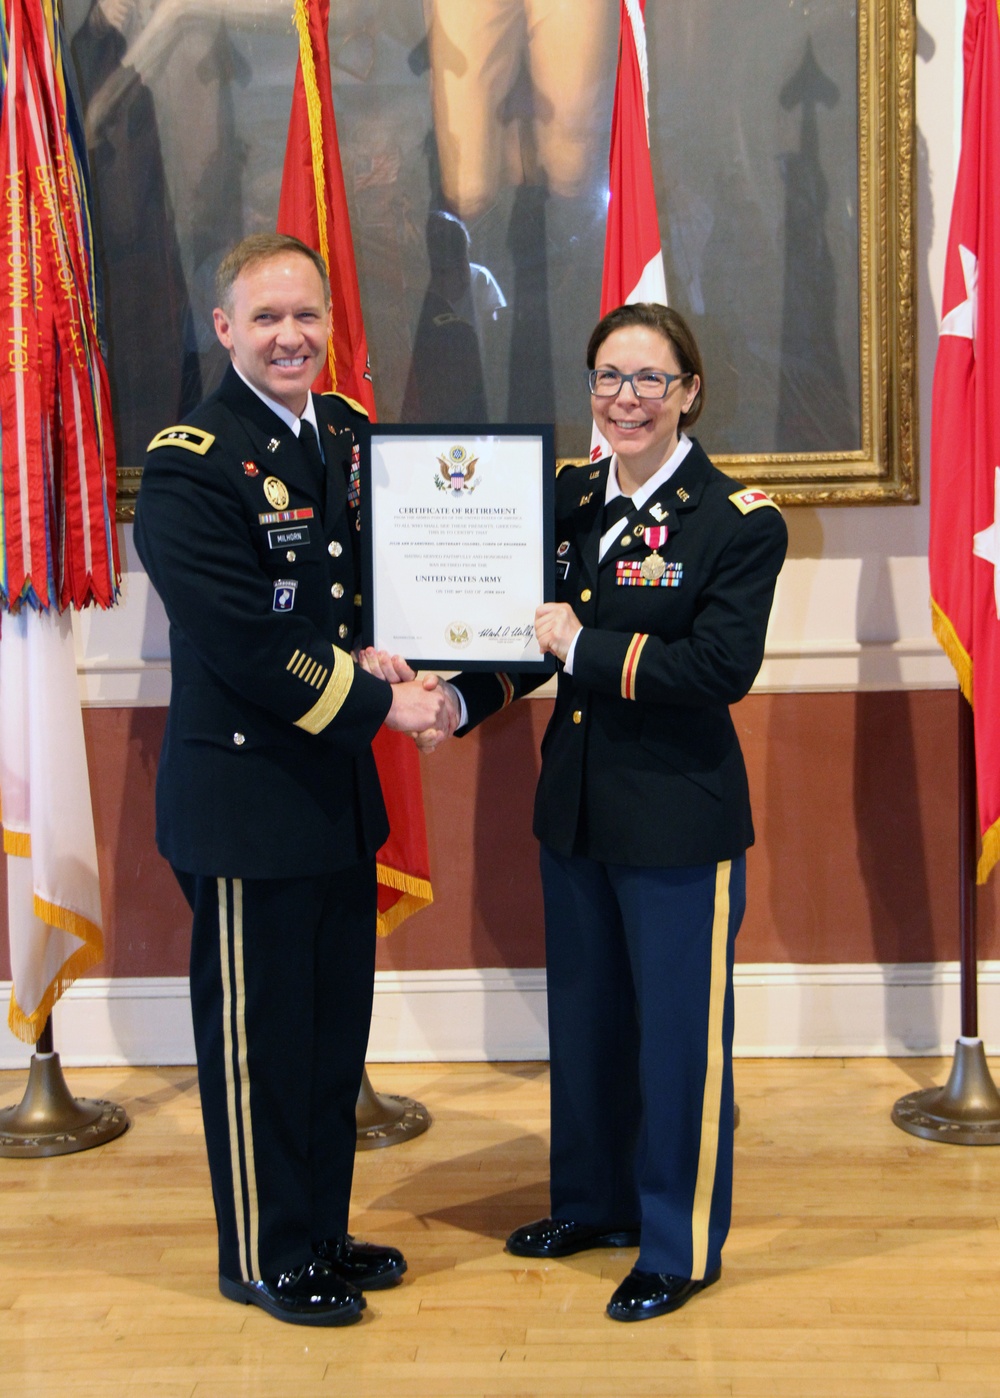 Army engineer officer retires after 23-year career